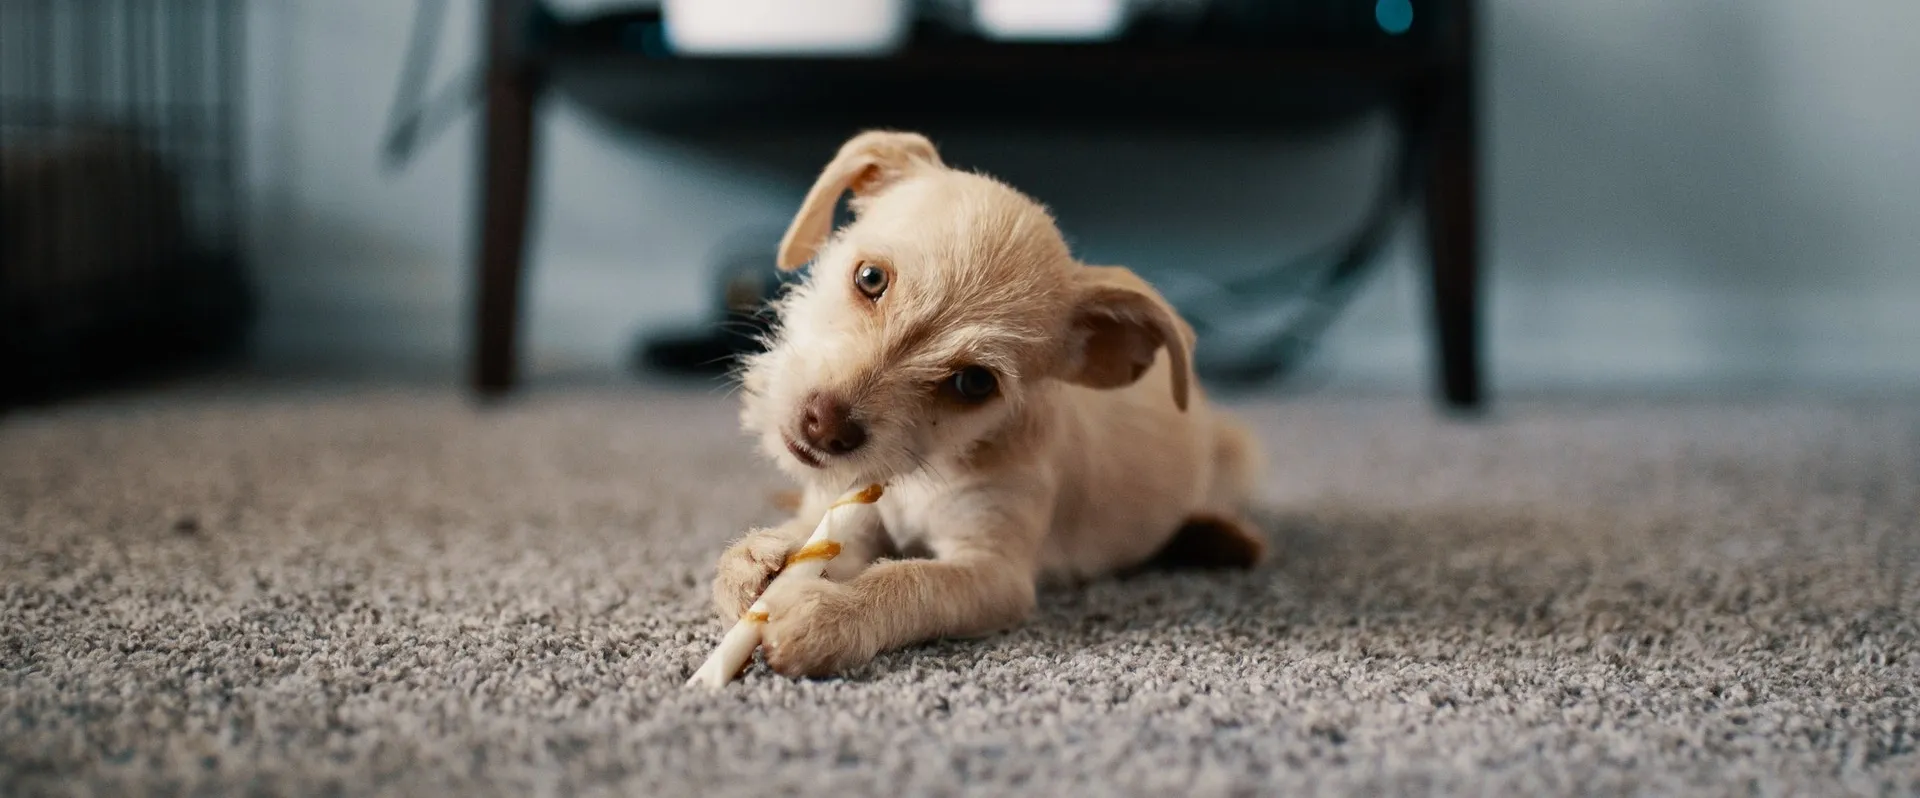 A small dog chewing on a toy in the floor.